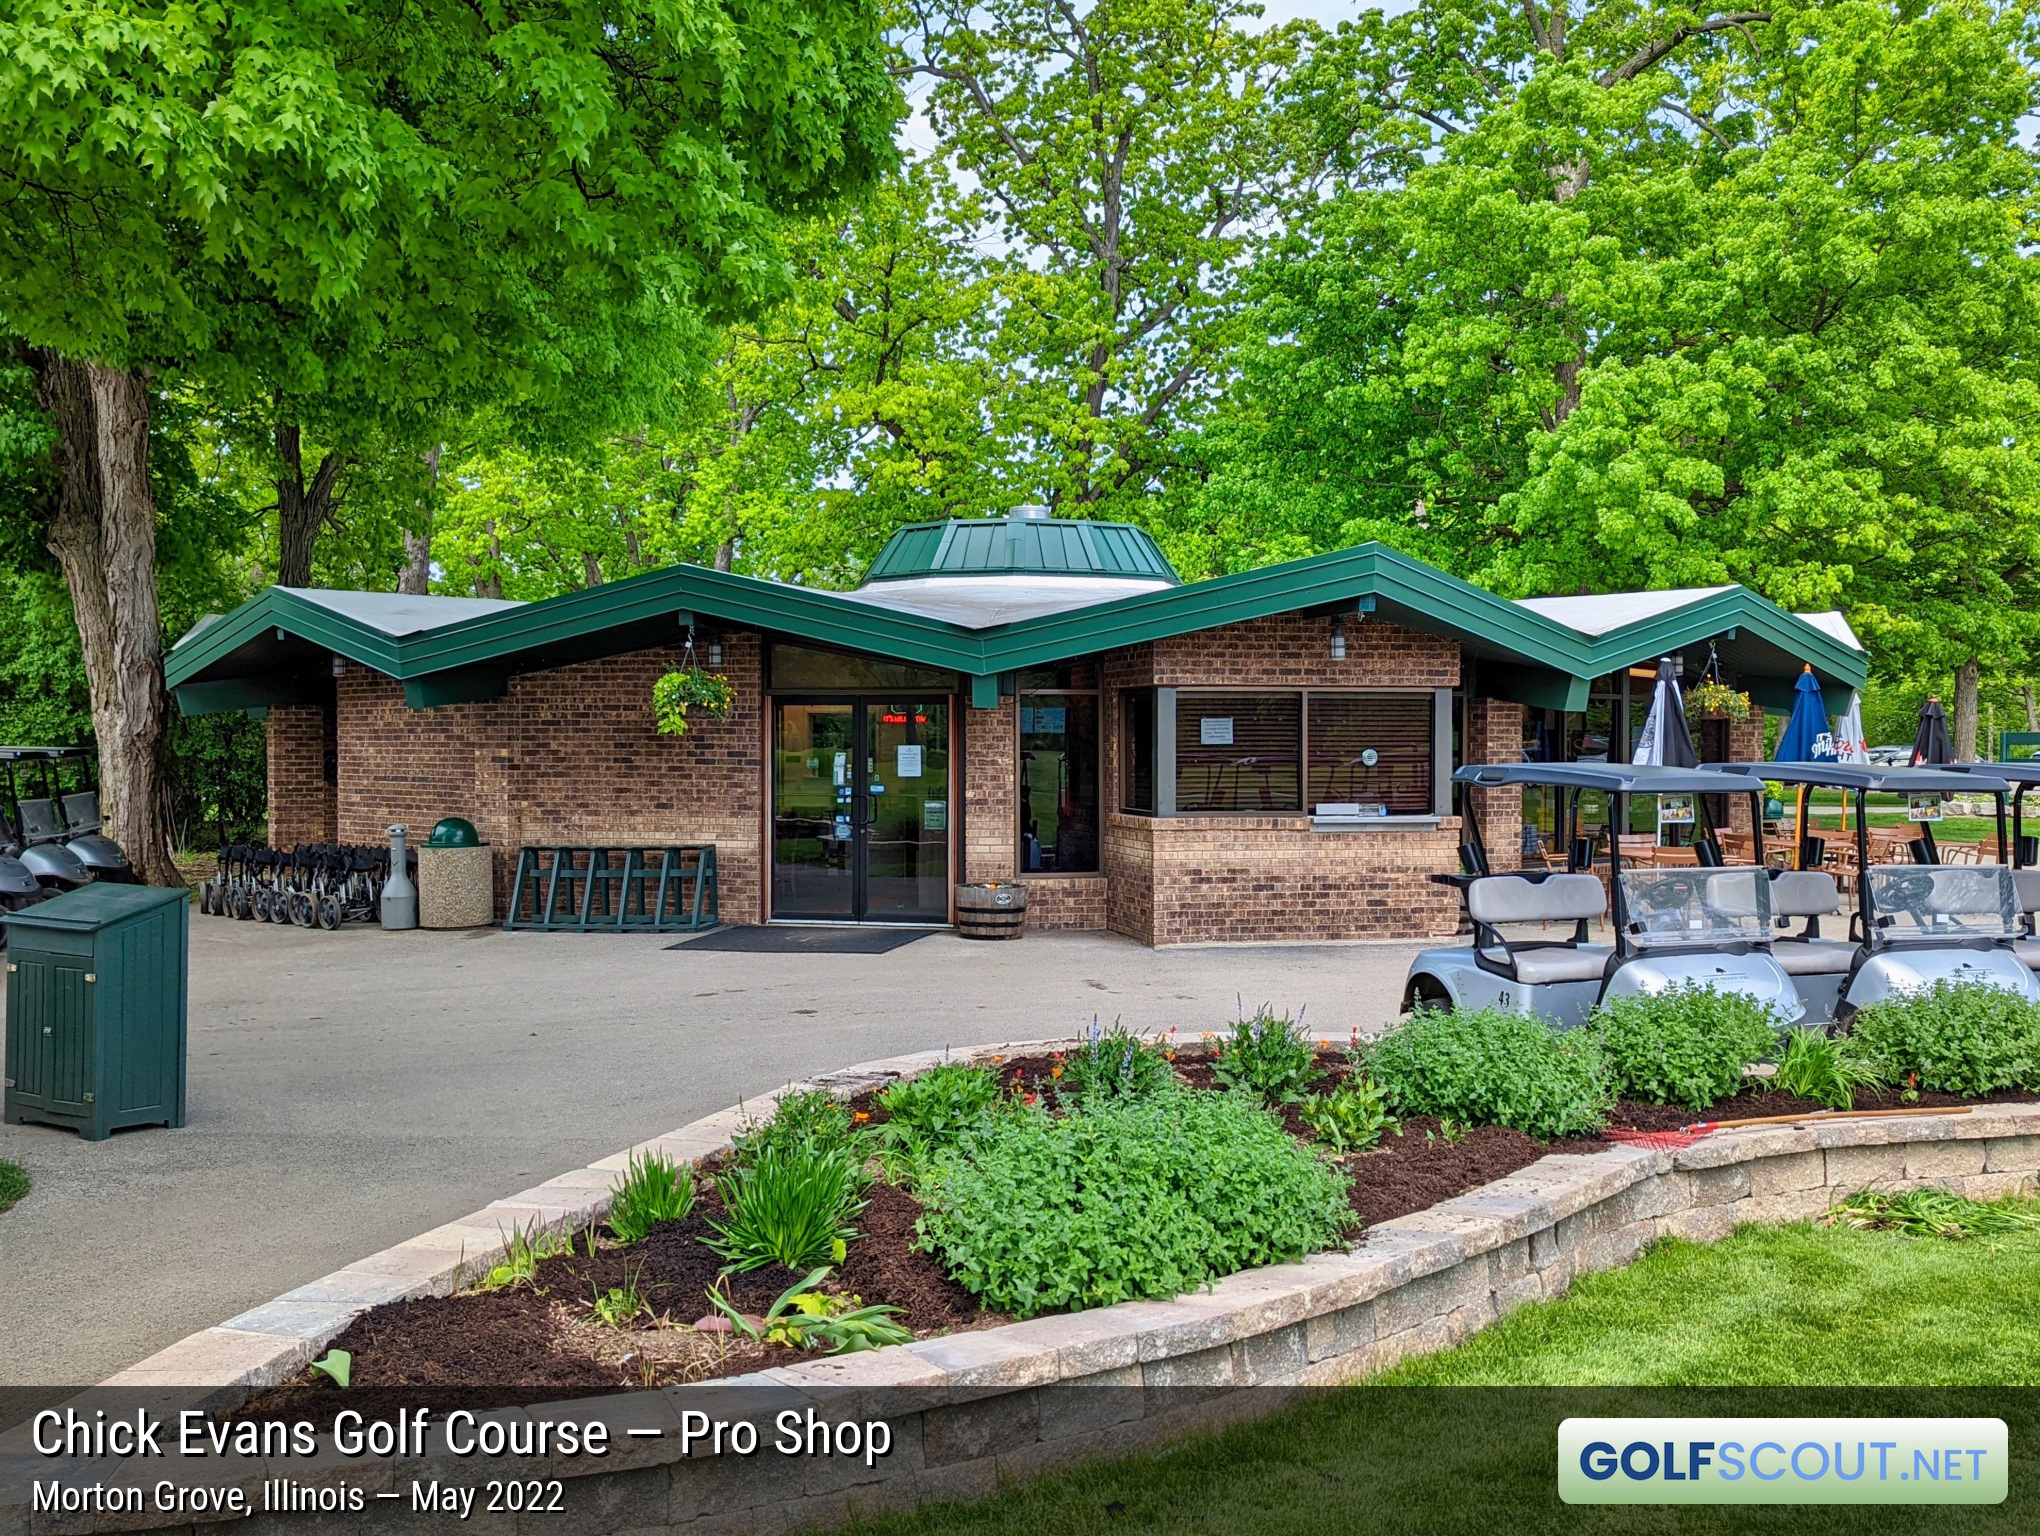 Photo of the pro shop at Chick Evans Golf Course in Morton Grove, Illinois. 